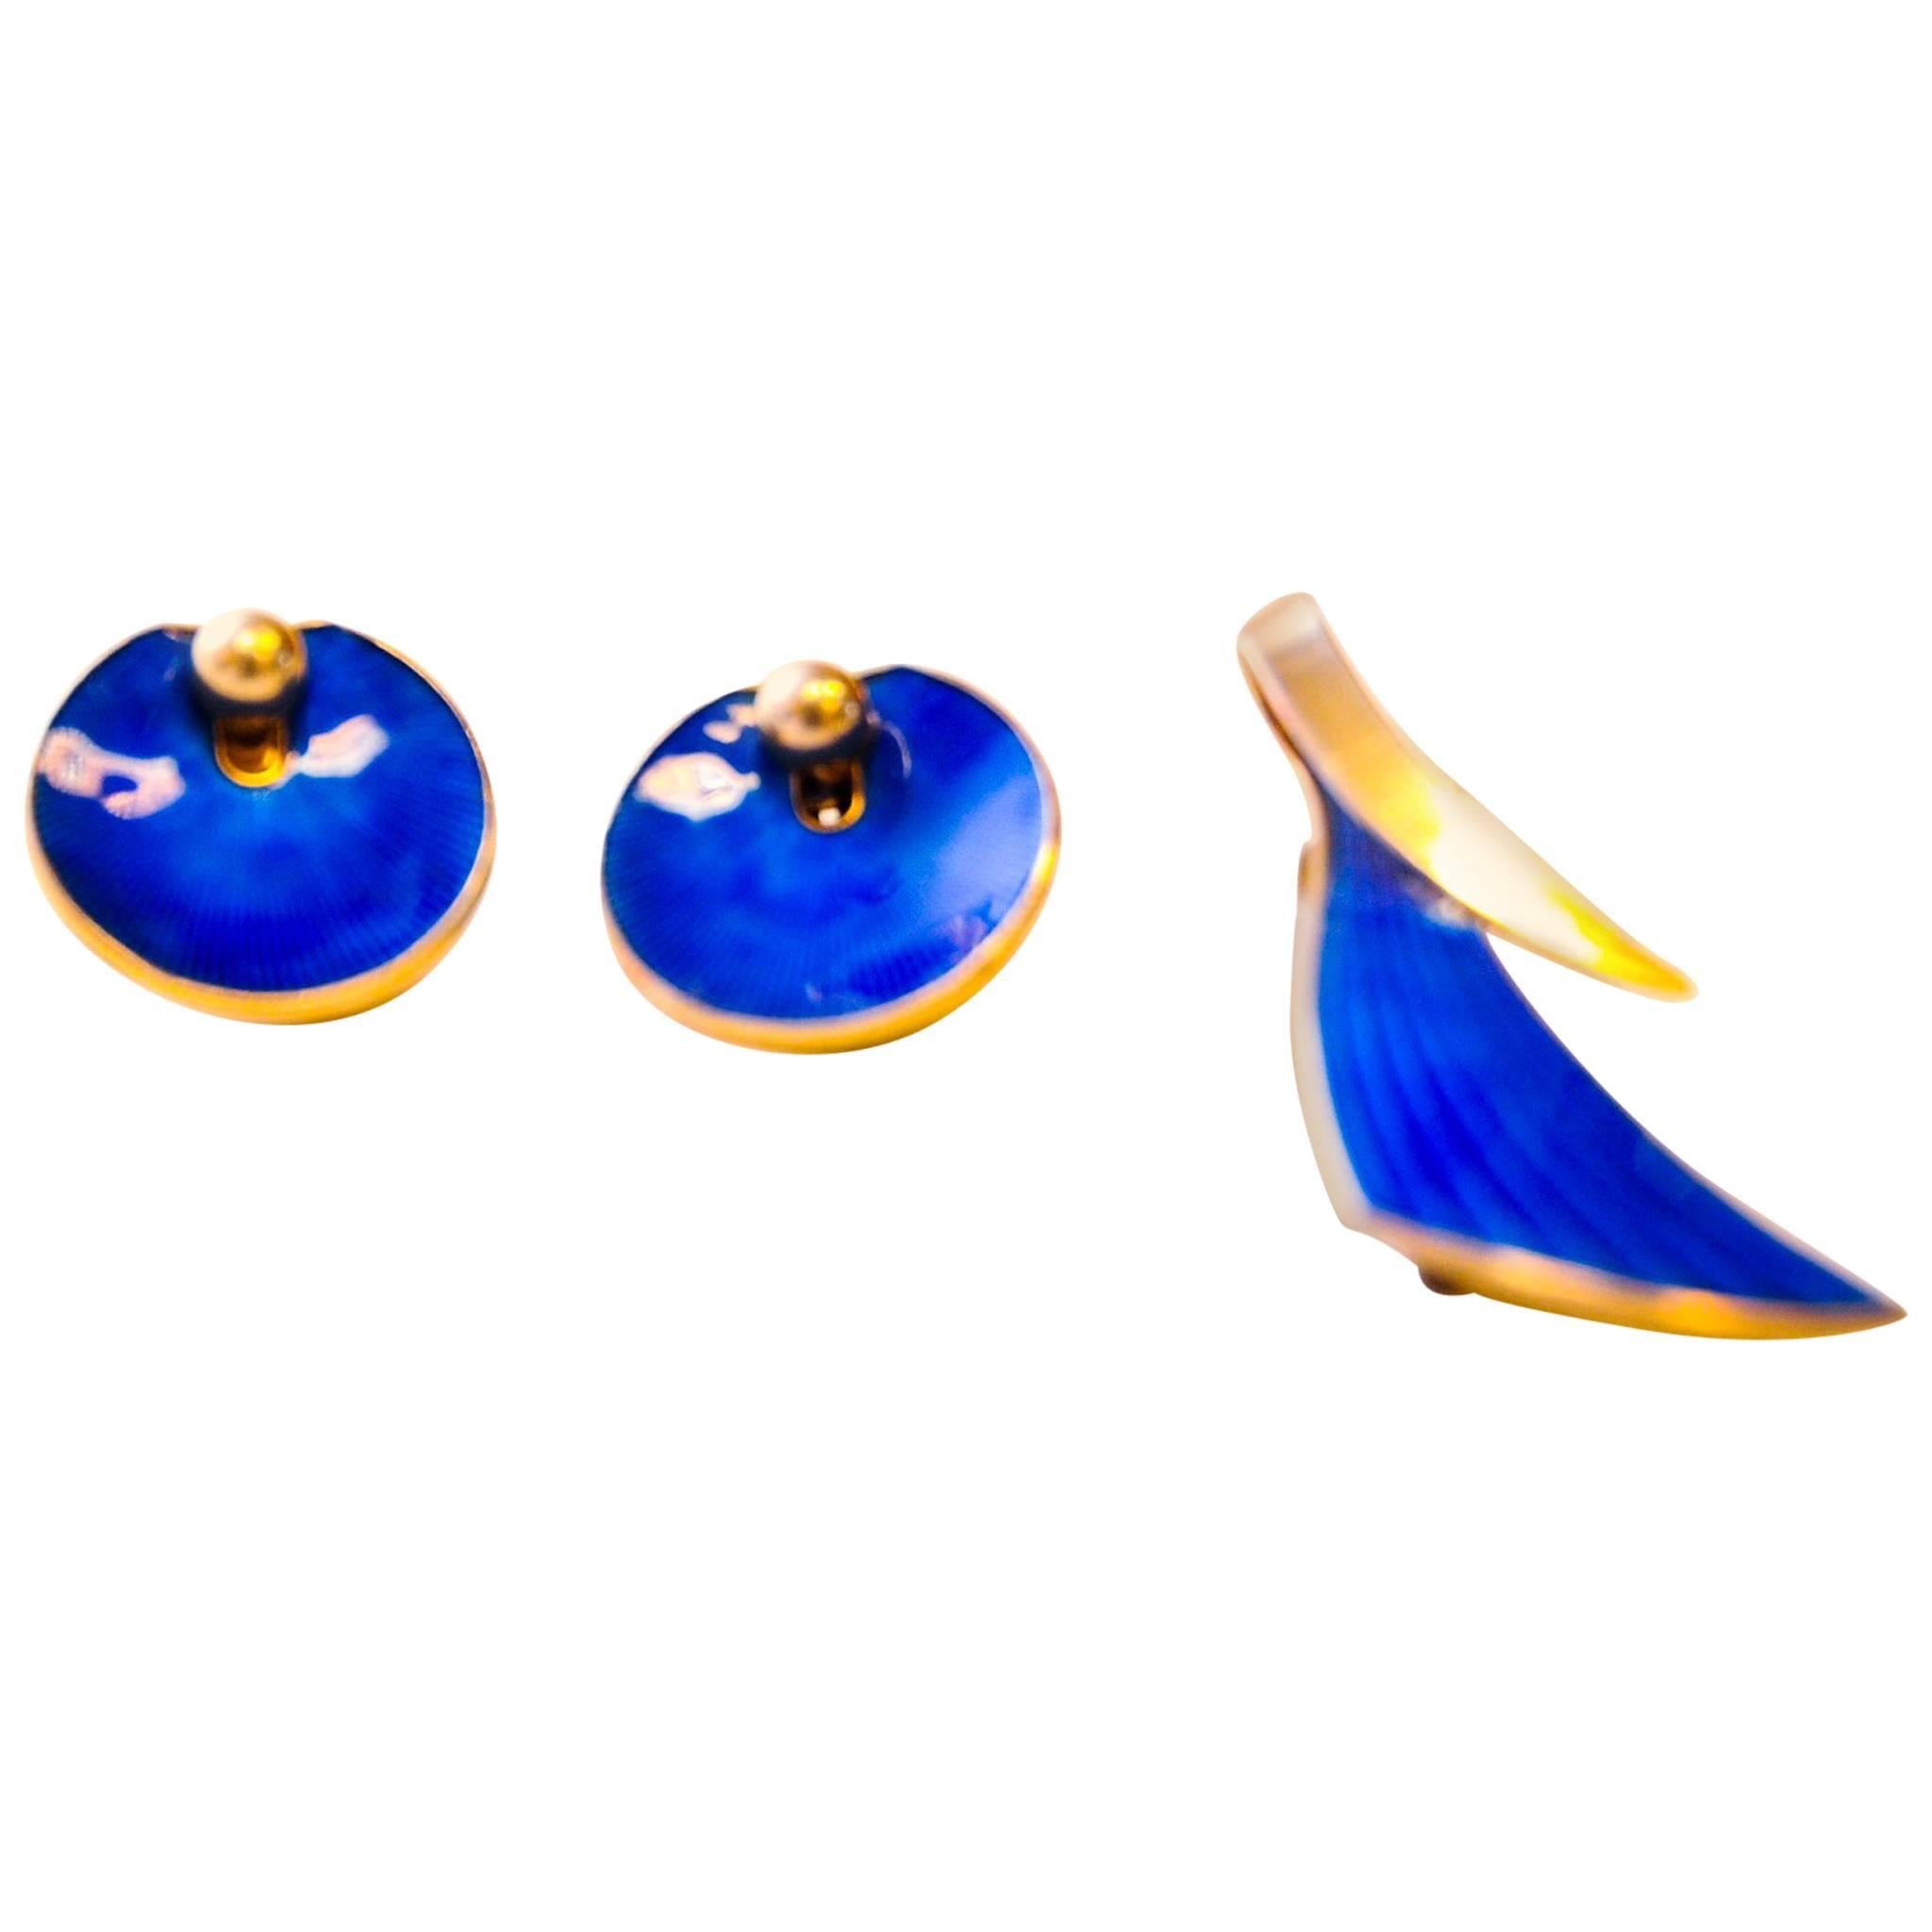 Silver Brosch and Earrings with Blue Enamel 1950`s, Albert Scharning, Norway